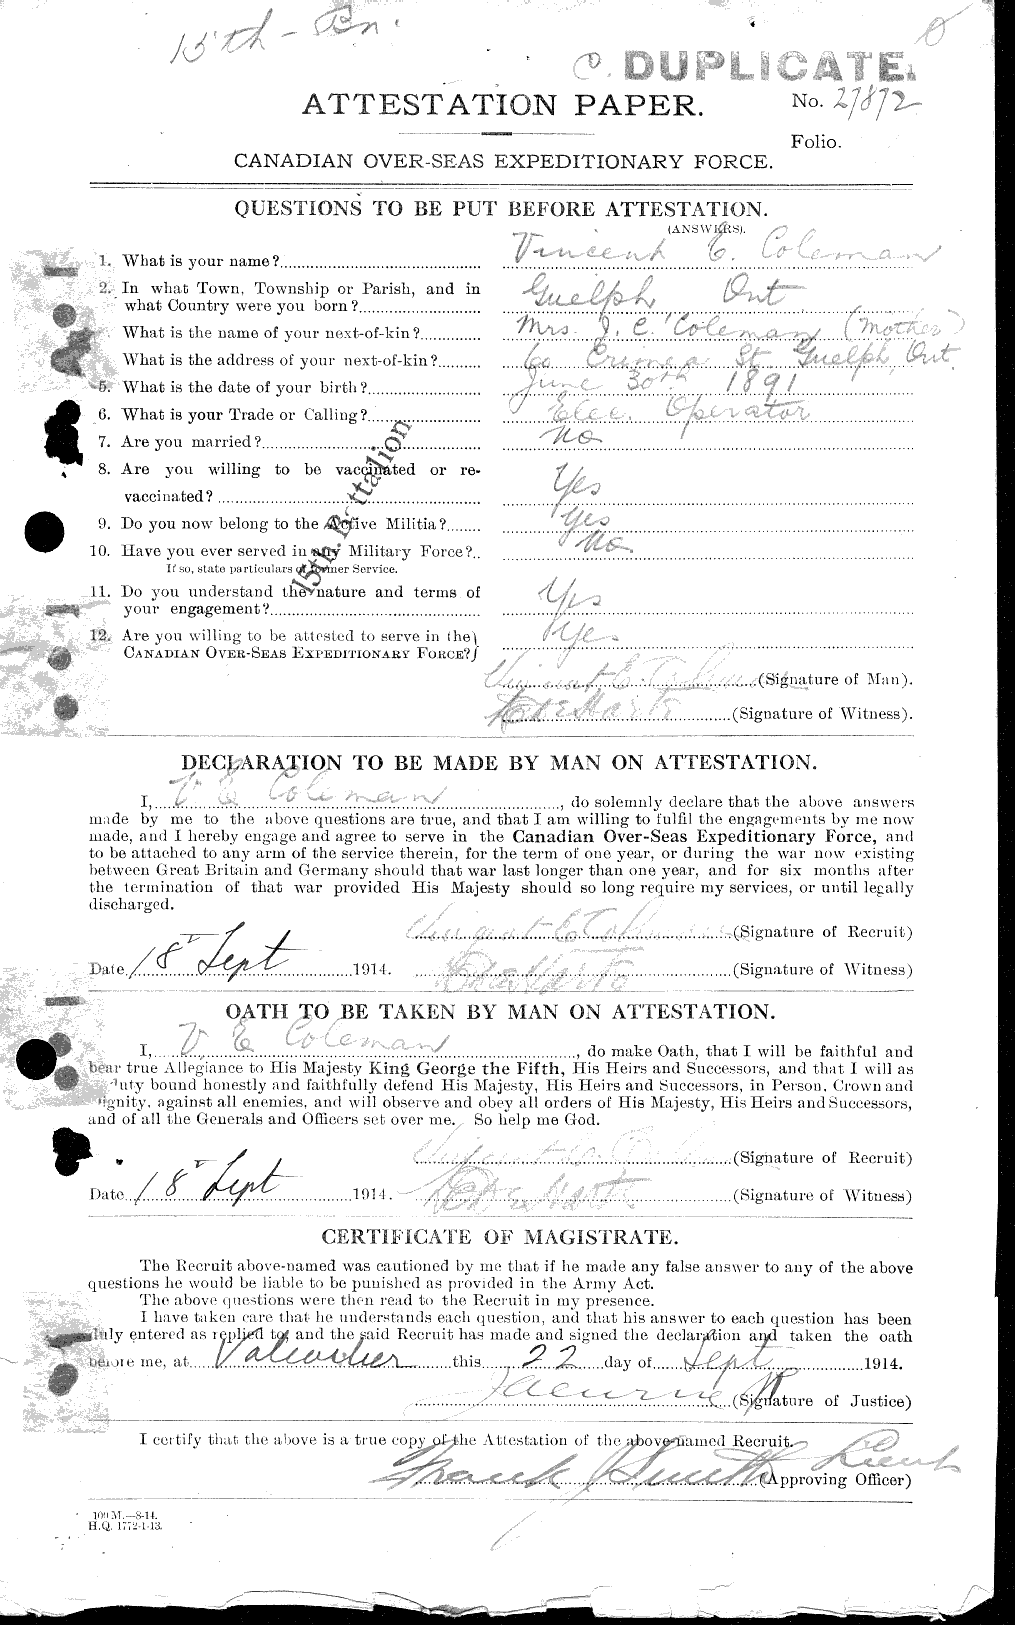 Personnel Records of the First World War - CEF 028285a